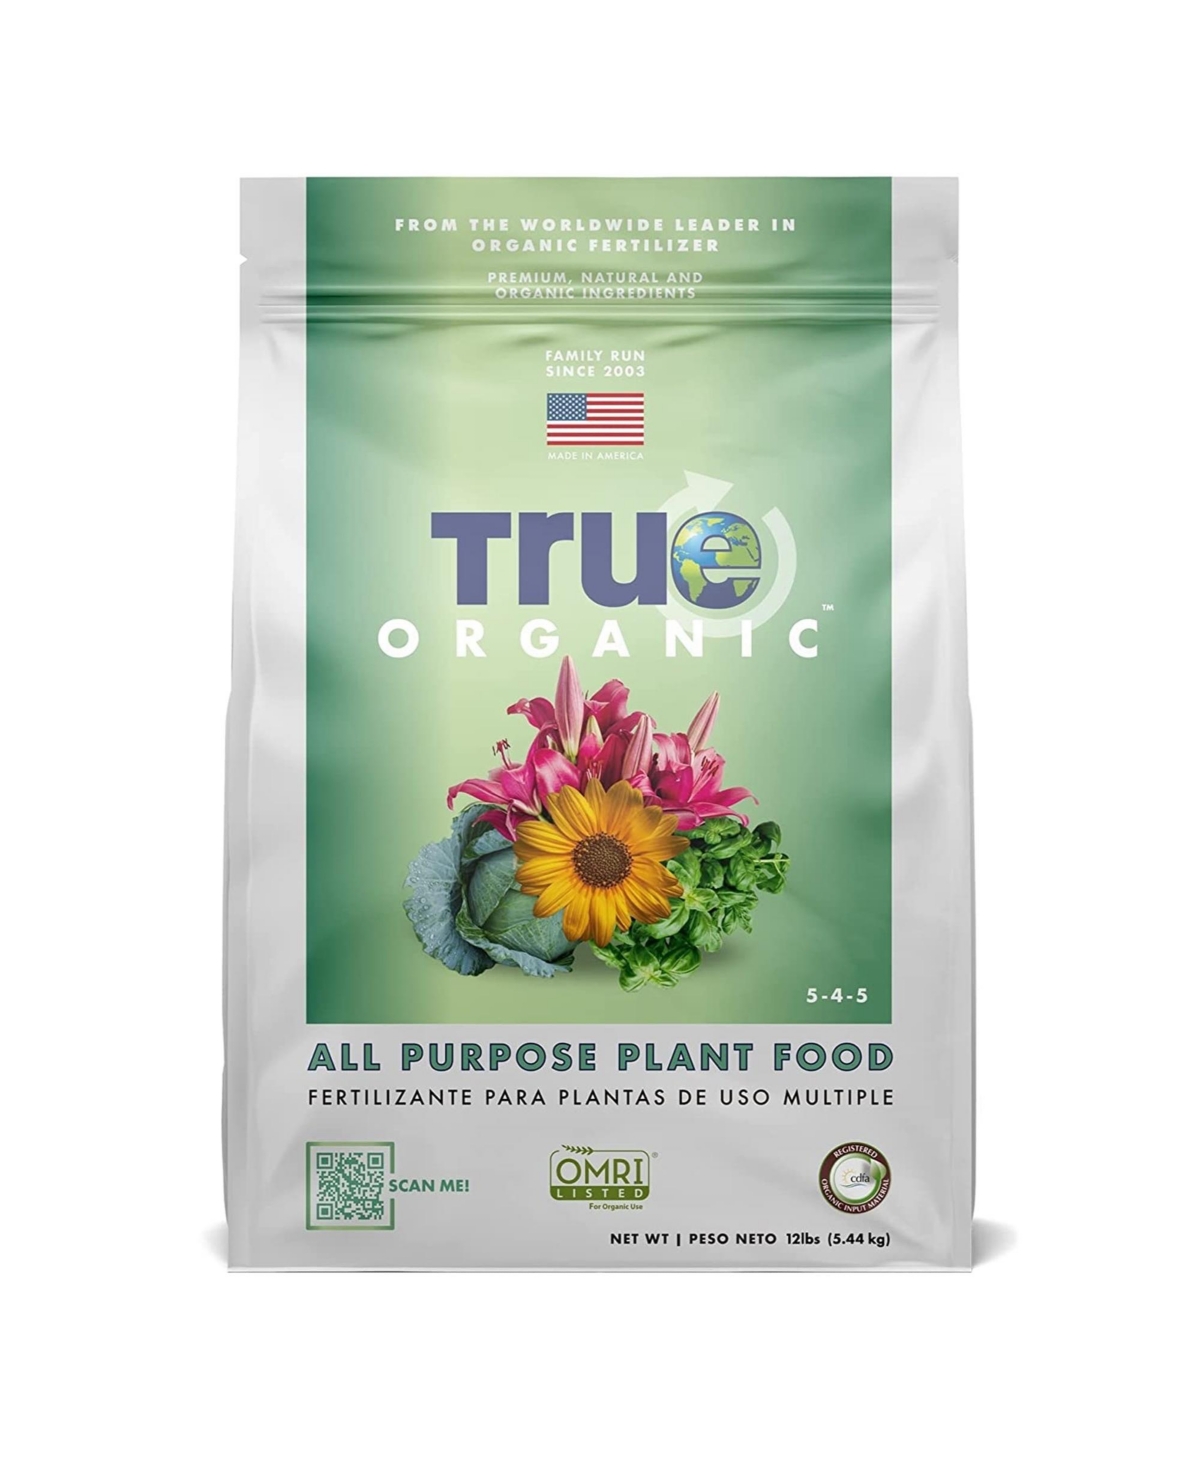 All-Purpose Plant Food for Organic Gardening, 12lb - Brown